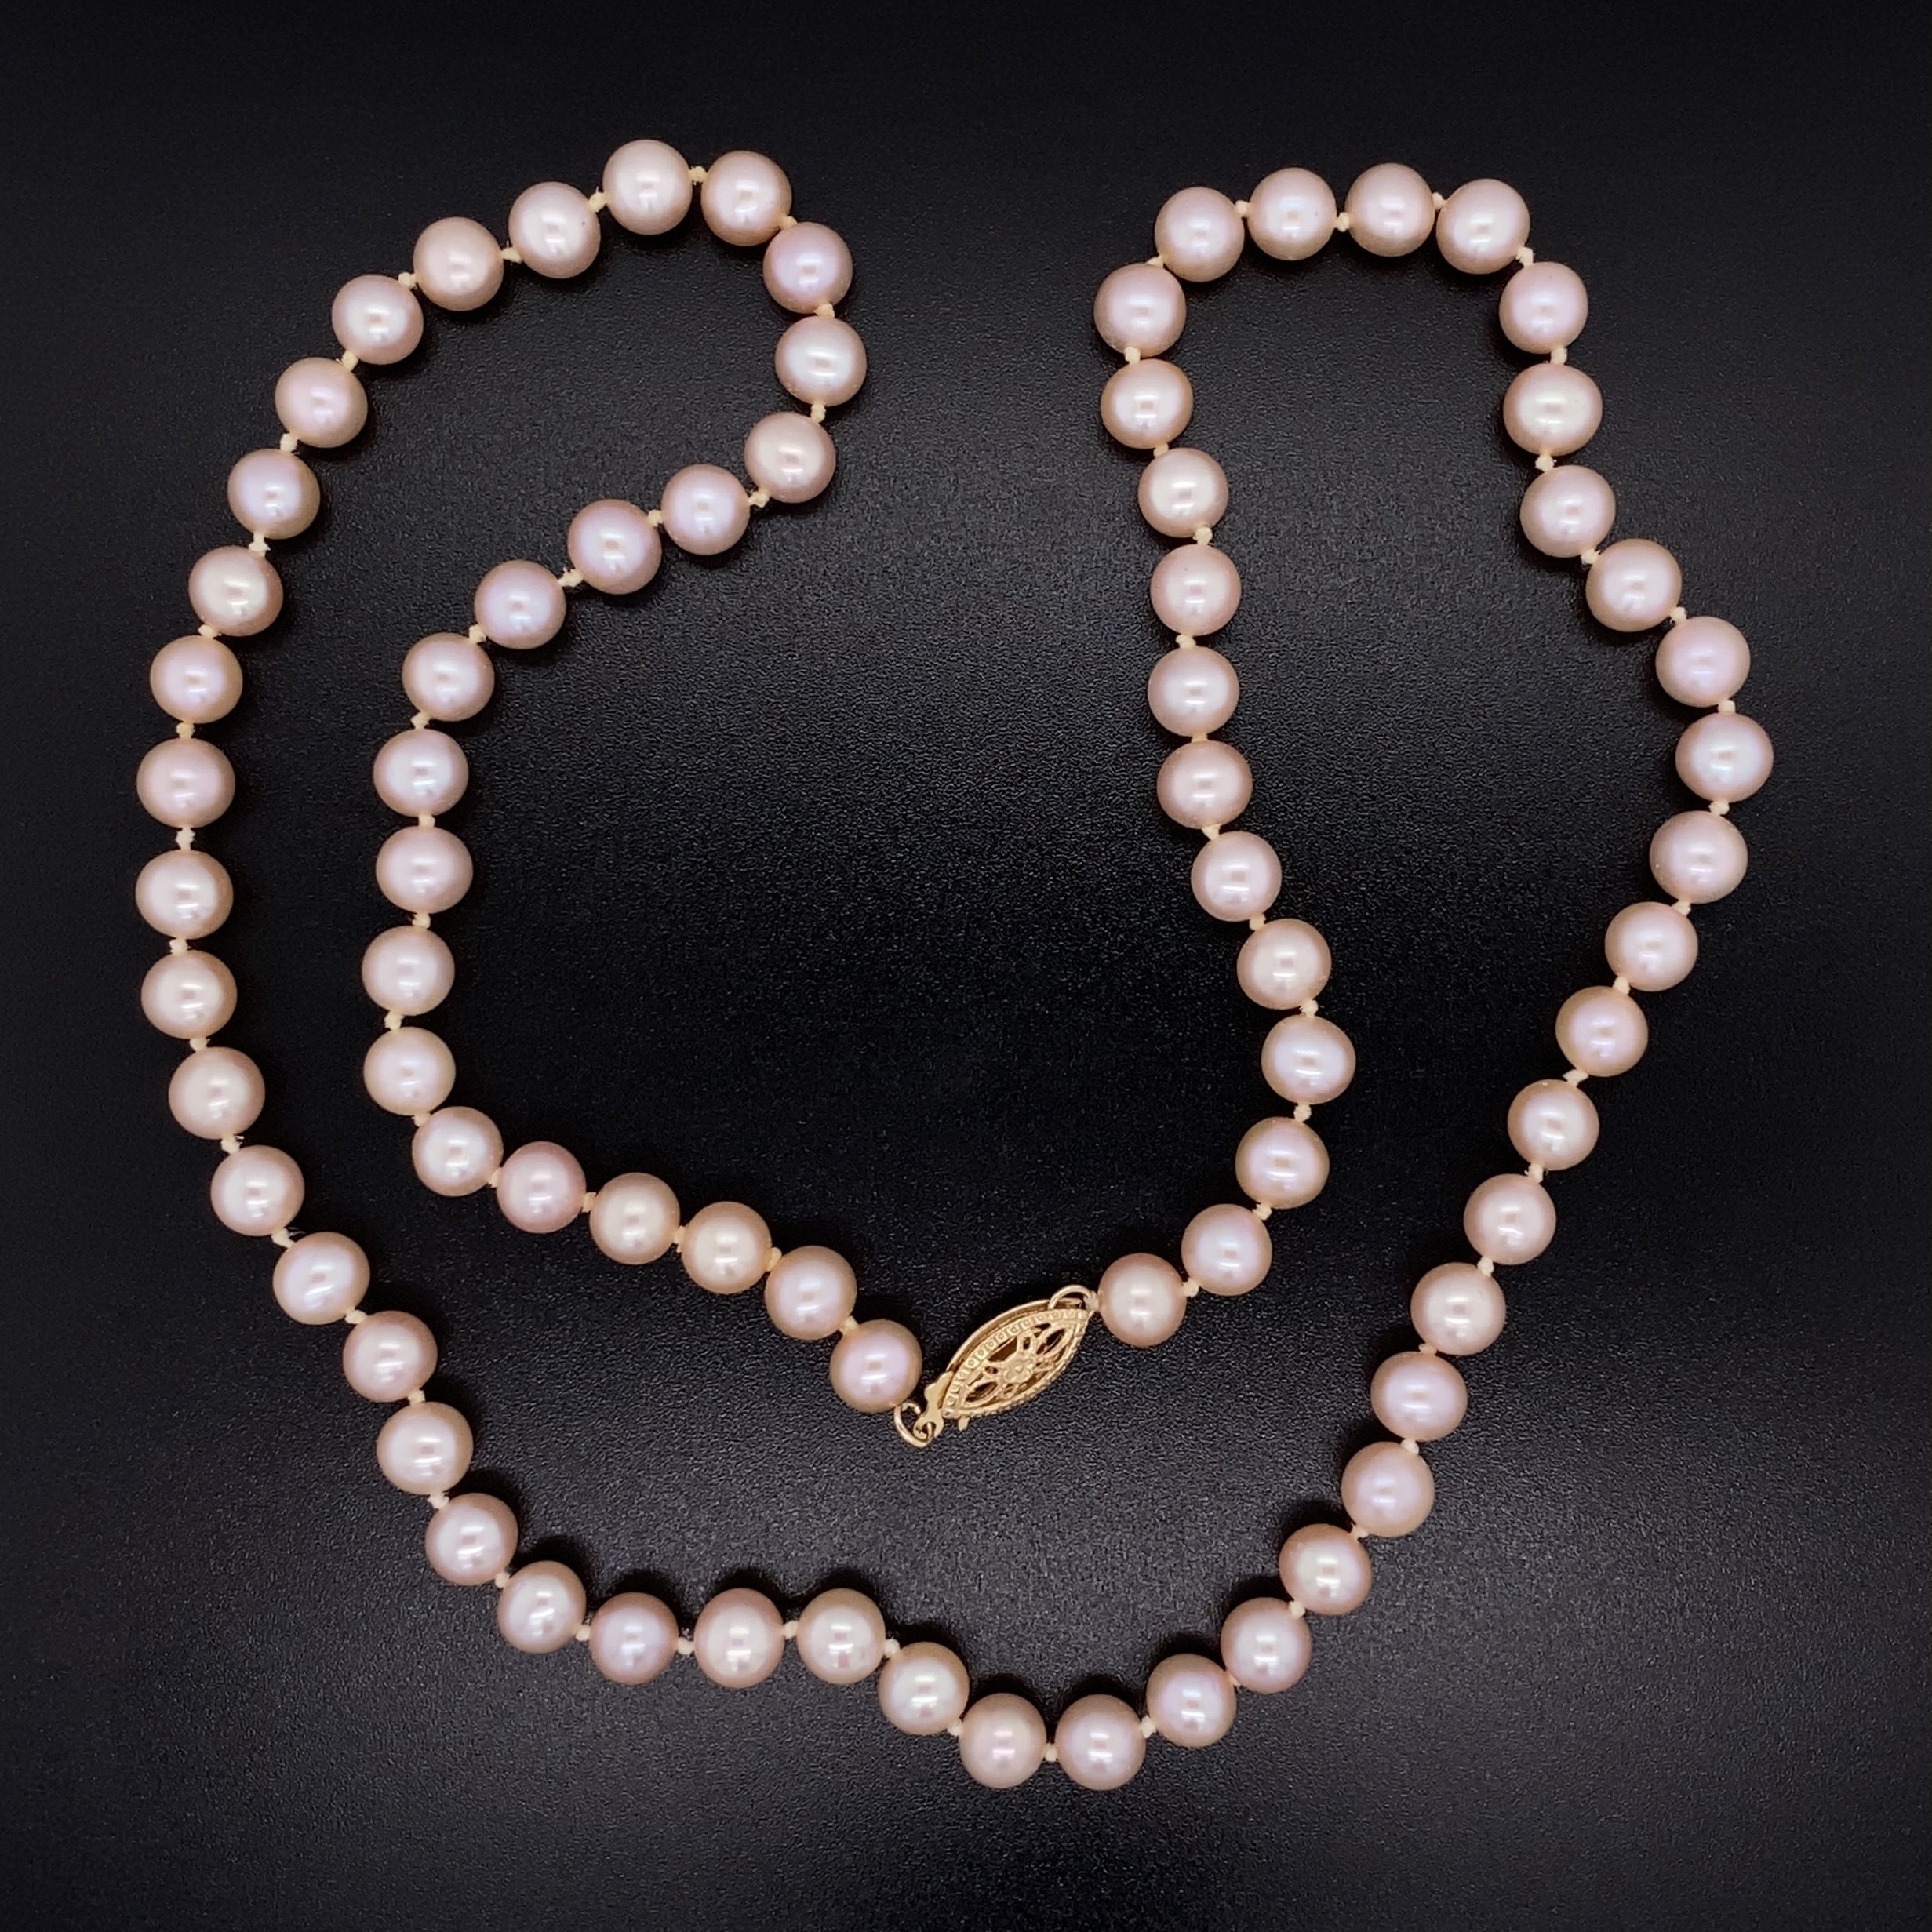 14K YG 5mm Pink Freshwater Pearl Necklace 18"